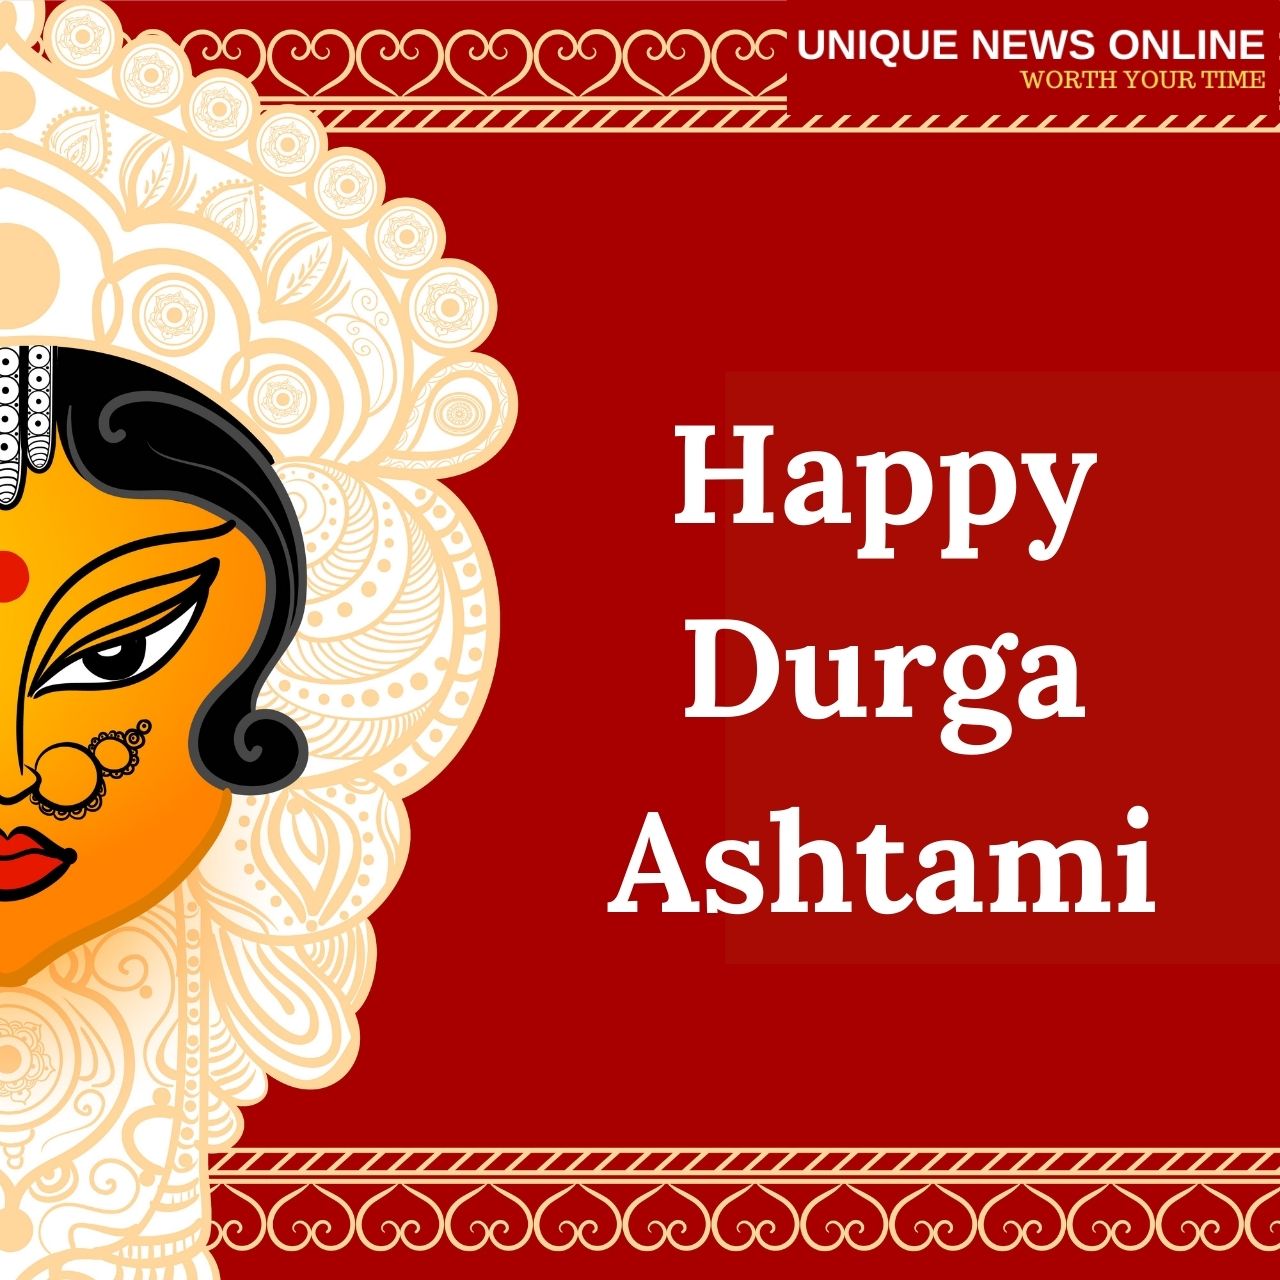 Happy Durga Ashtami 2021 Wishes Messages Greetings Quotes And Images To Share On Maha Ashtami 7851